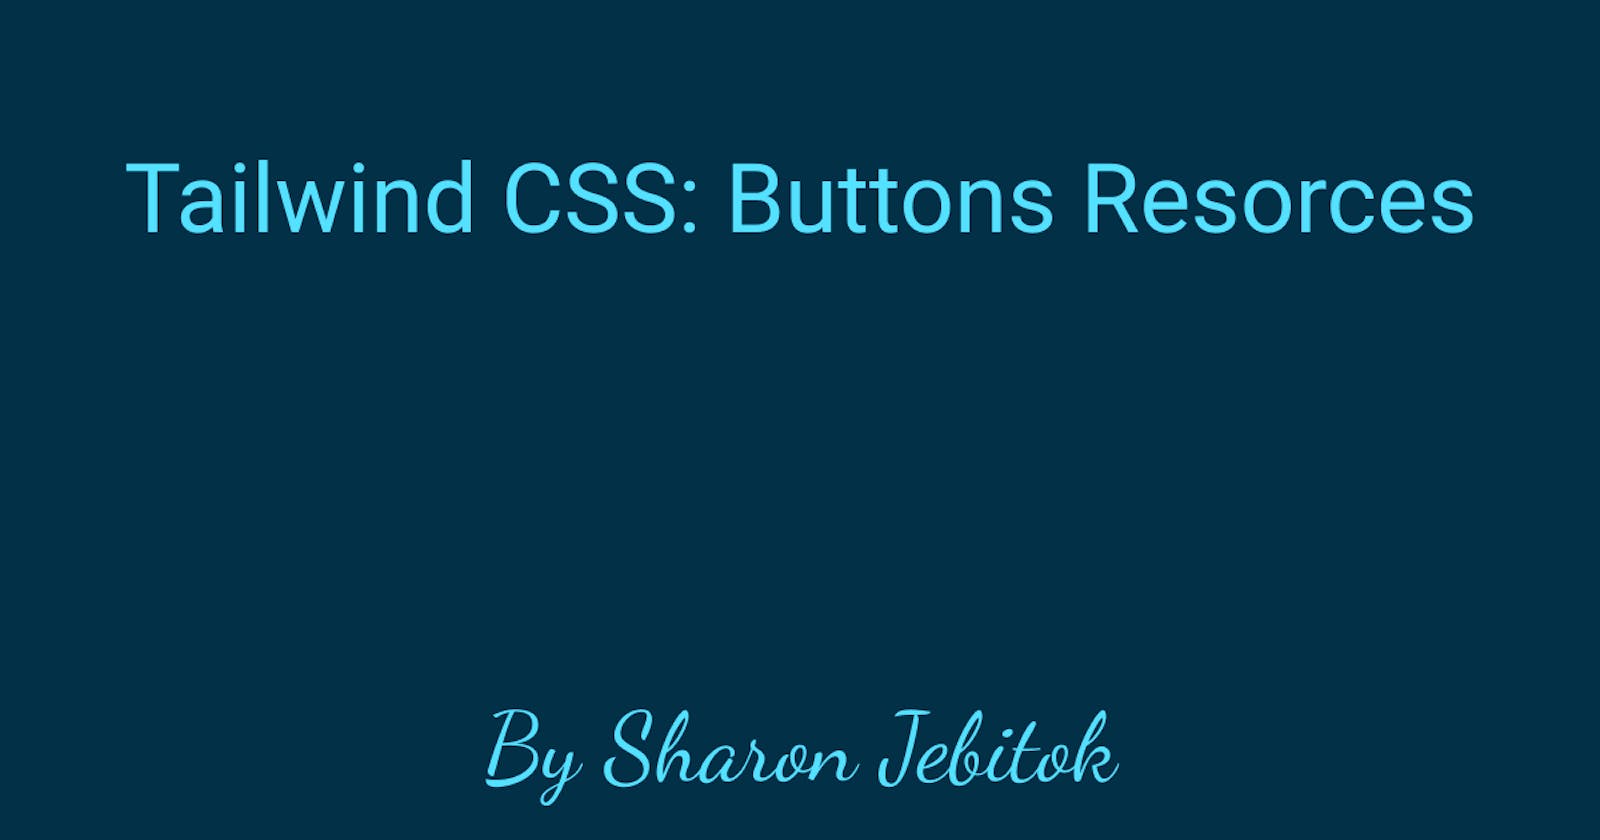 Tailwind CSS: Buttons